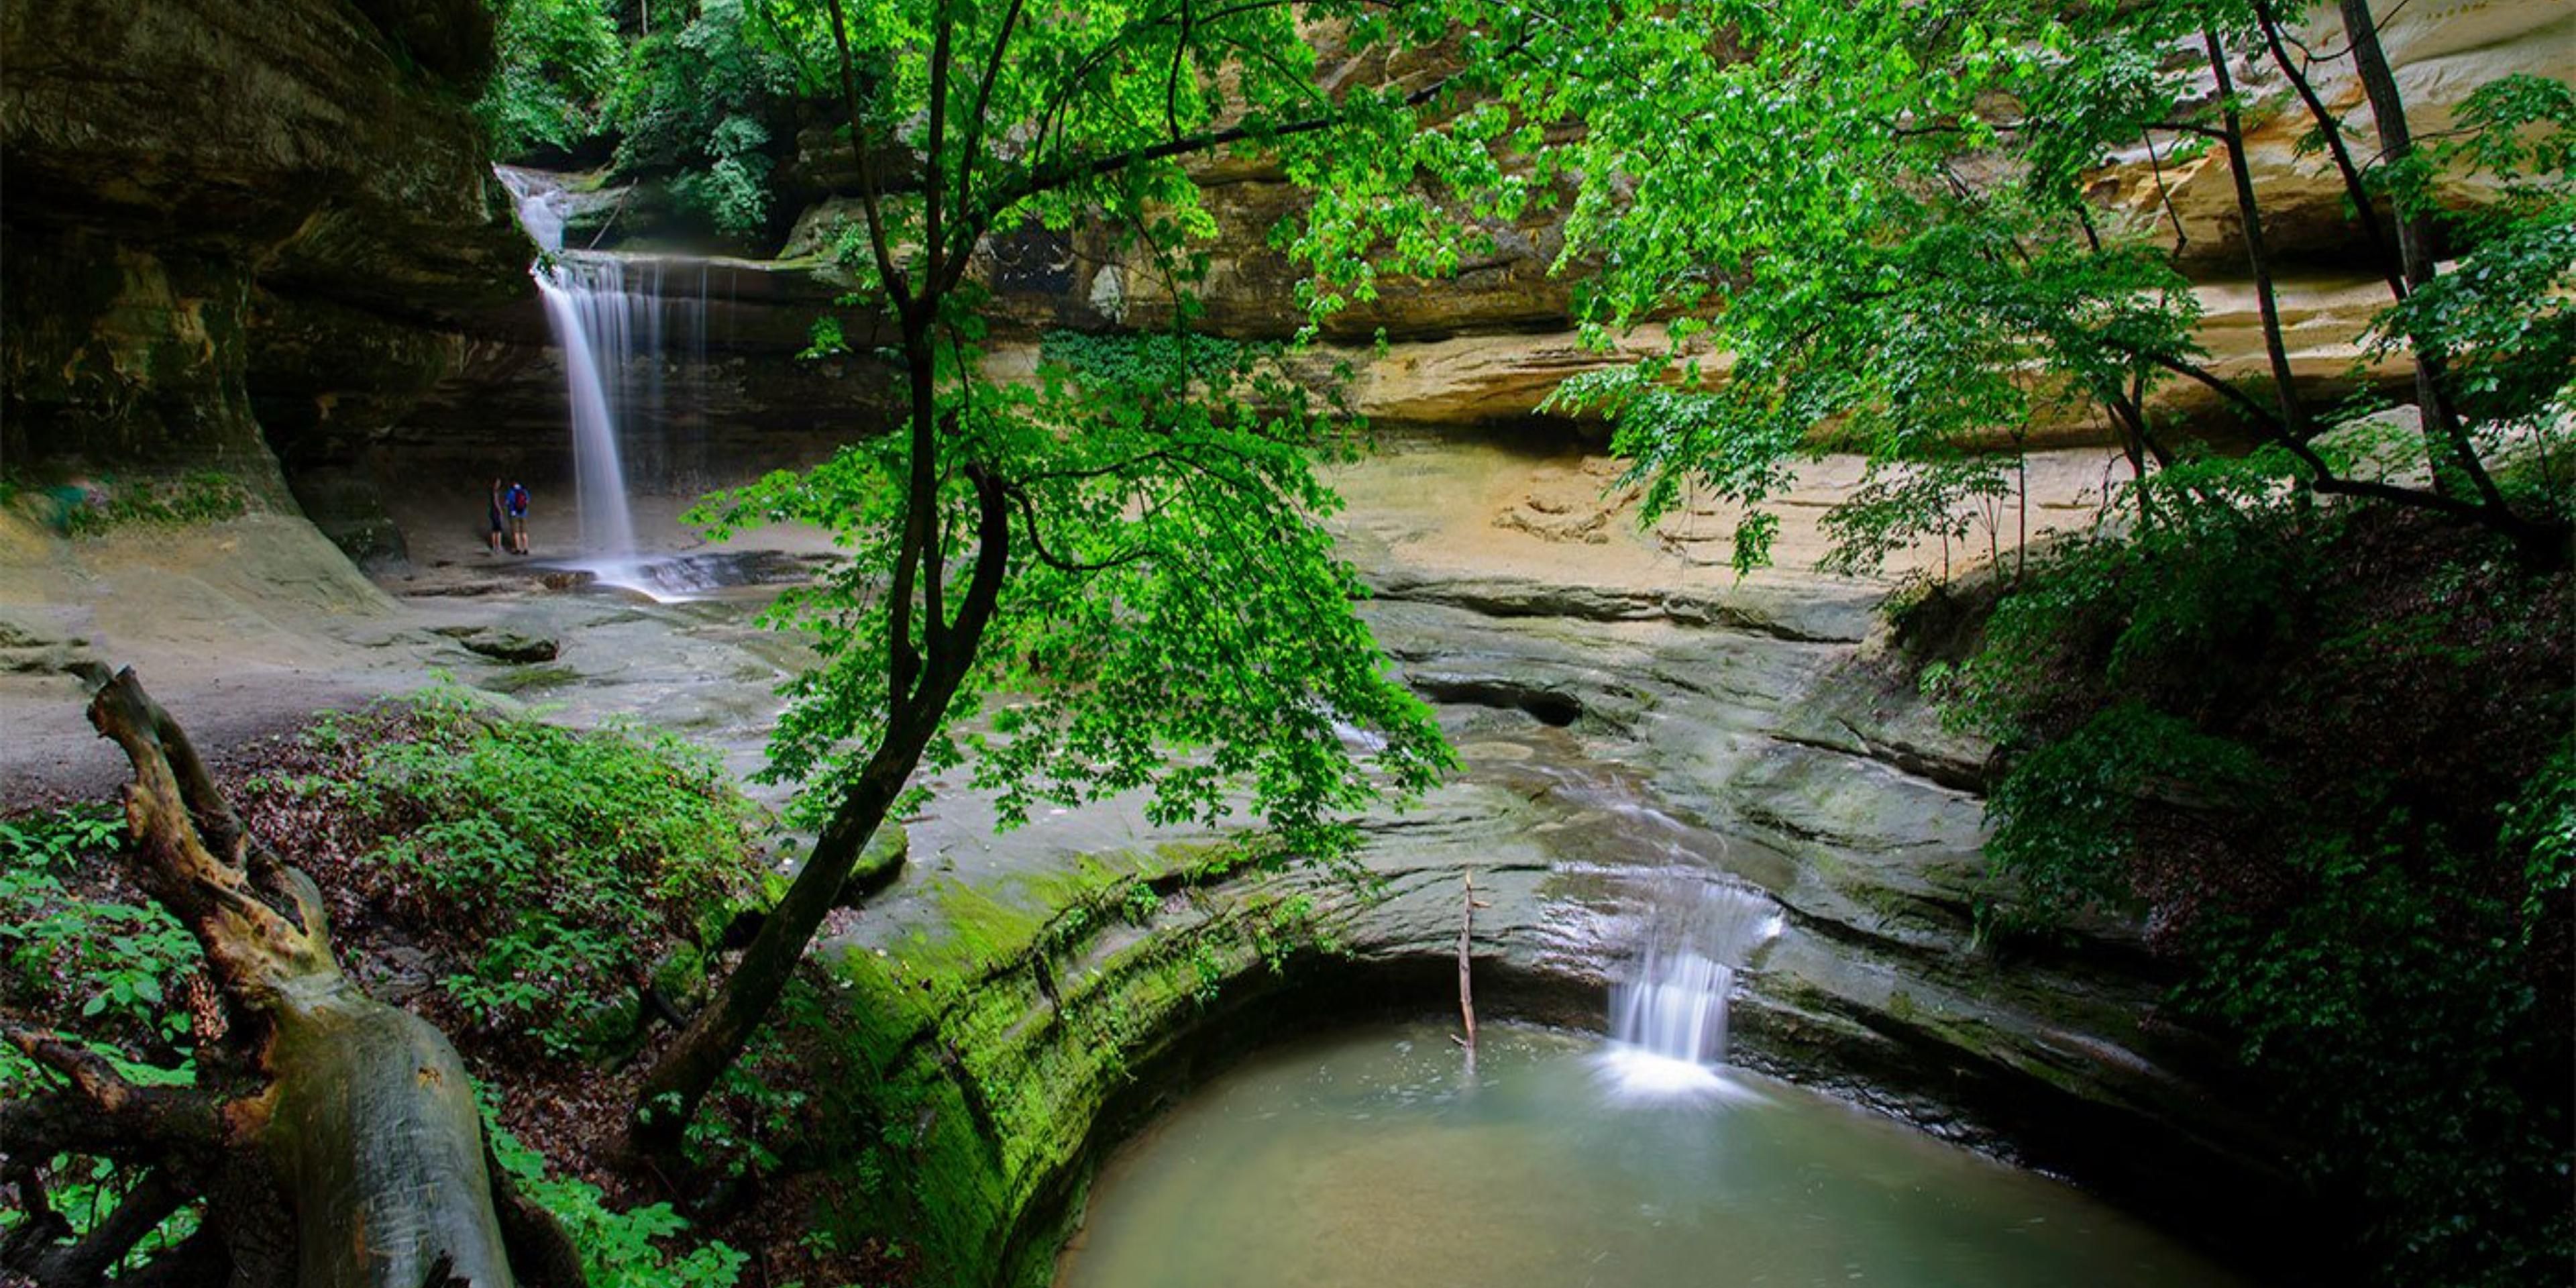 Just a short drive away, Starved Rock State Park is a world apart with towering trees, seasonal waterfalls, 13 miles of trails, boating and fishing.  